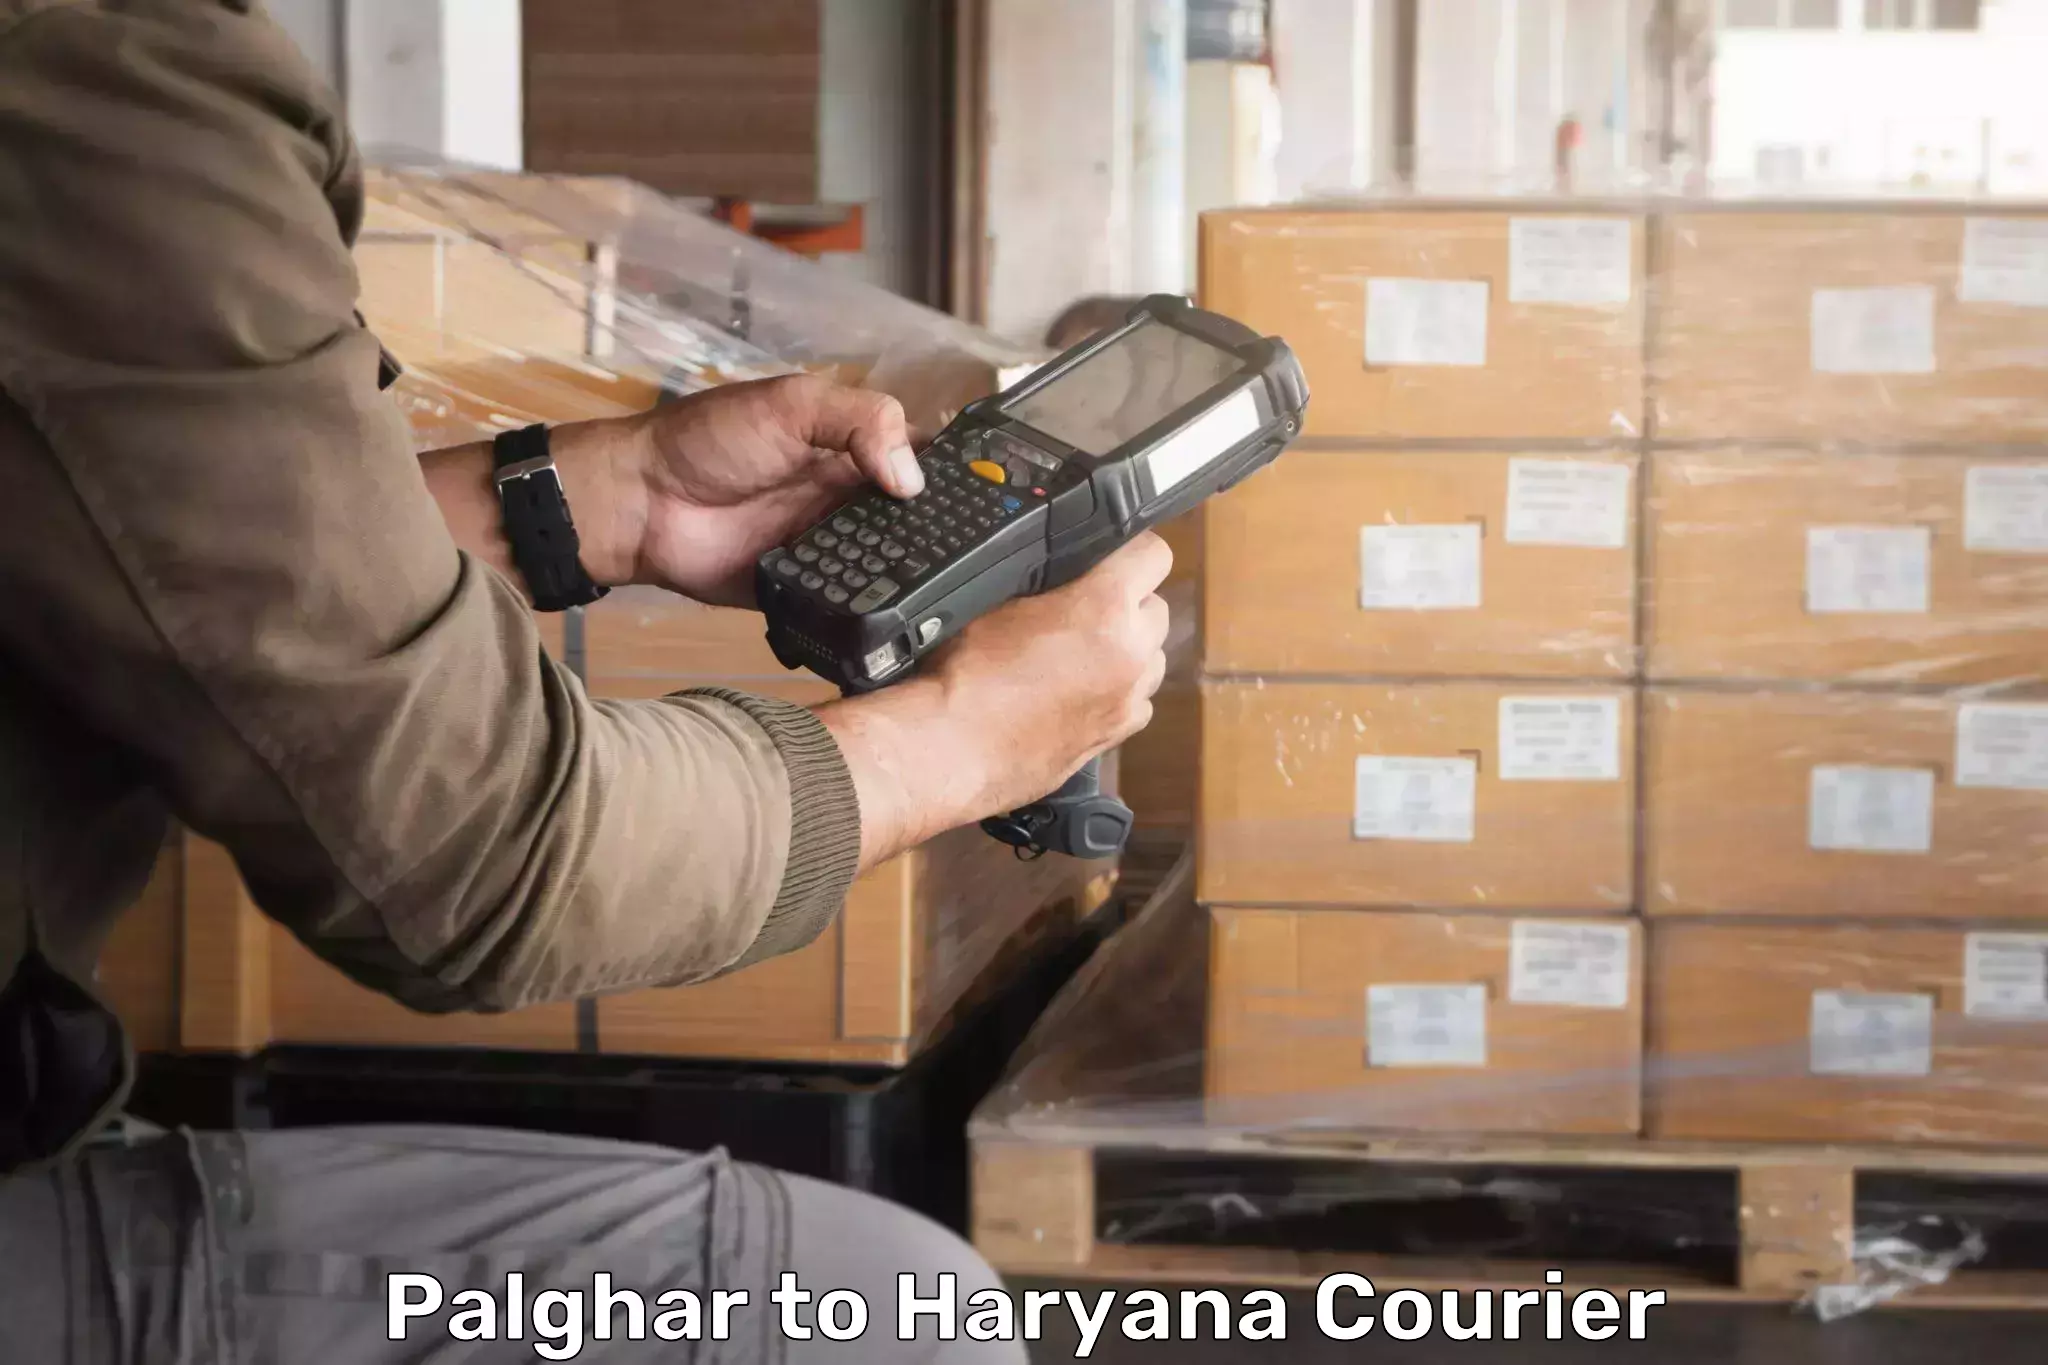 On-demand courier Palghar to Chaudhary Charan Singh Haryana Agricultural University Hisar